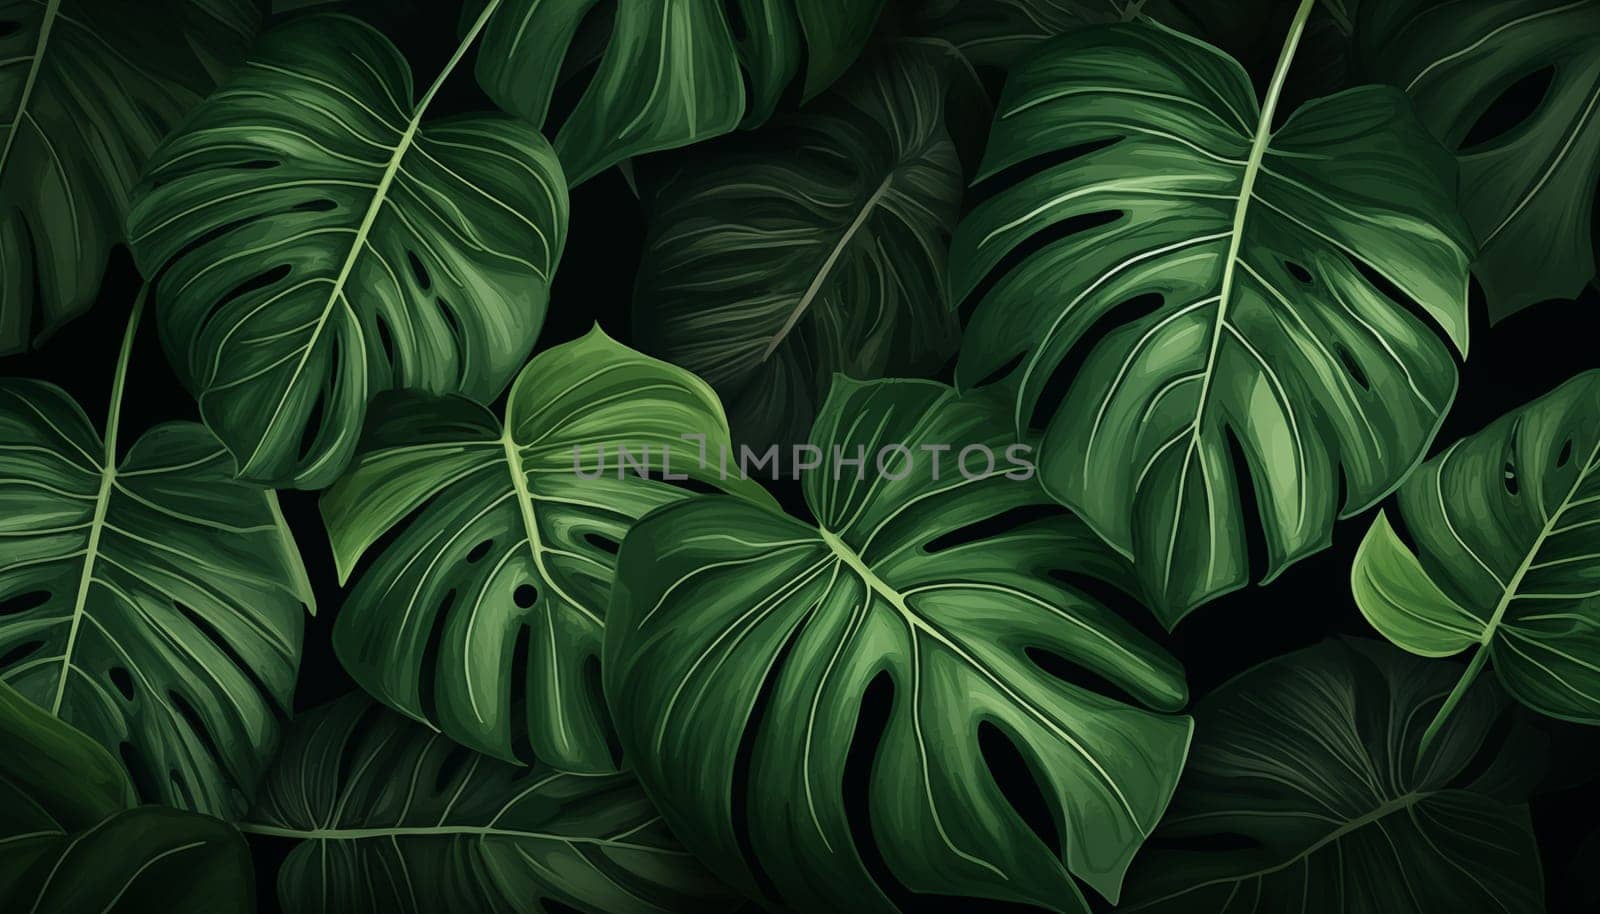 Green tropical palm leaves Monstera. High quality photo